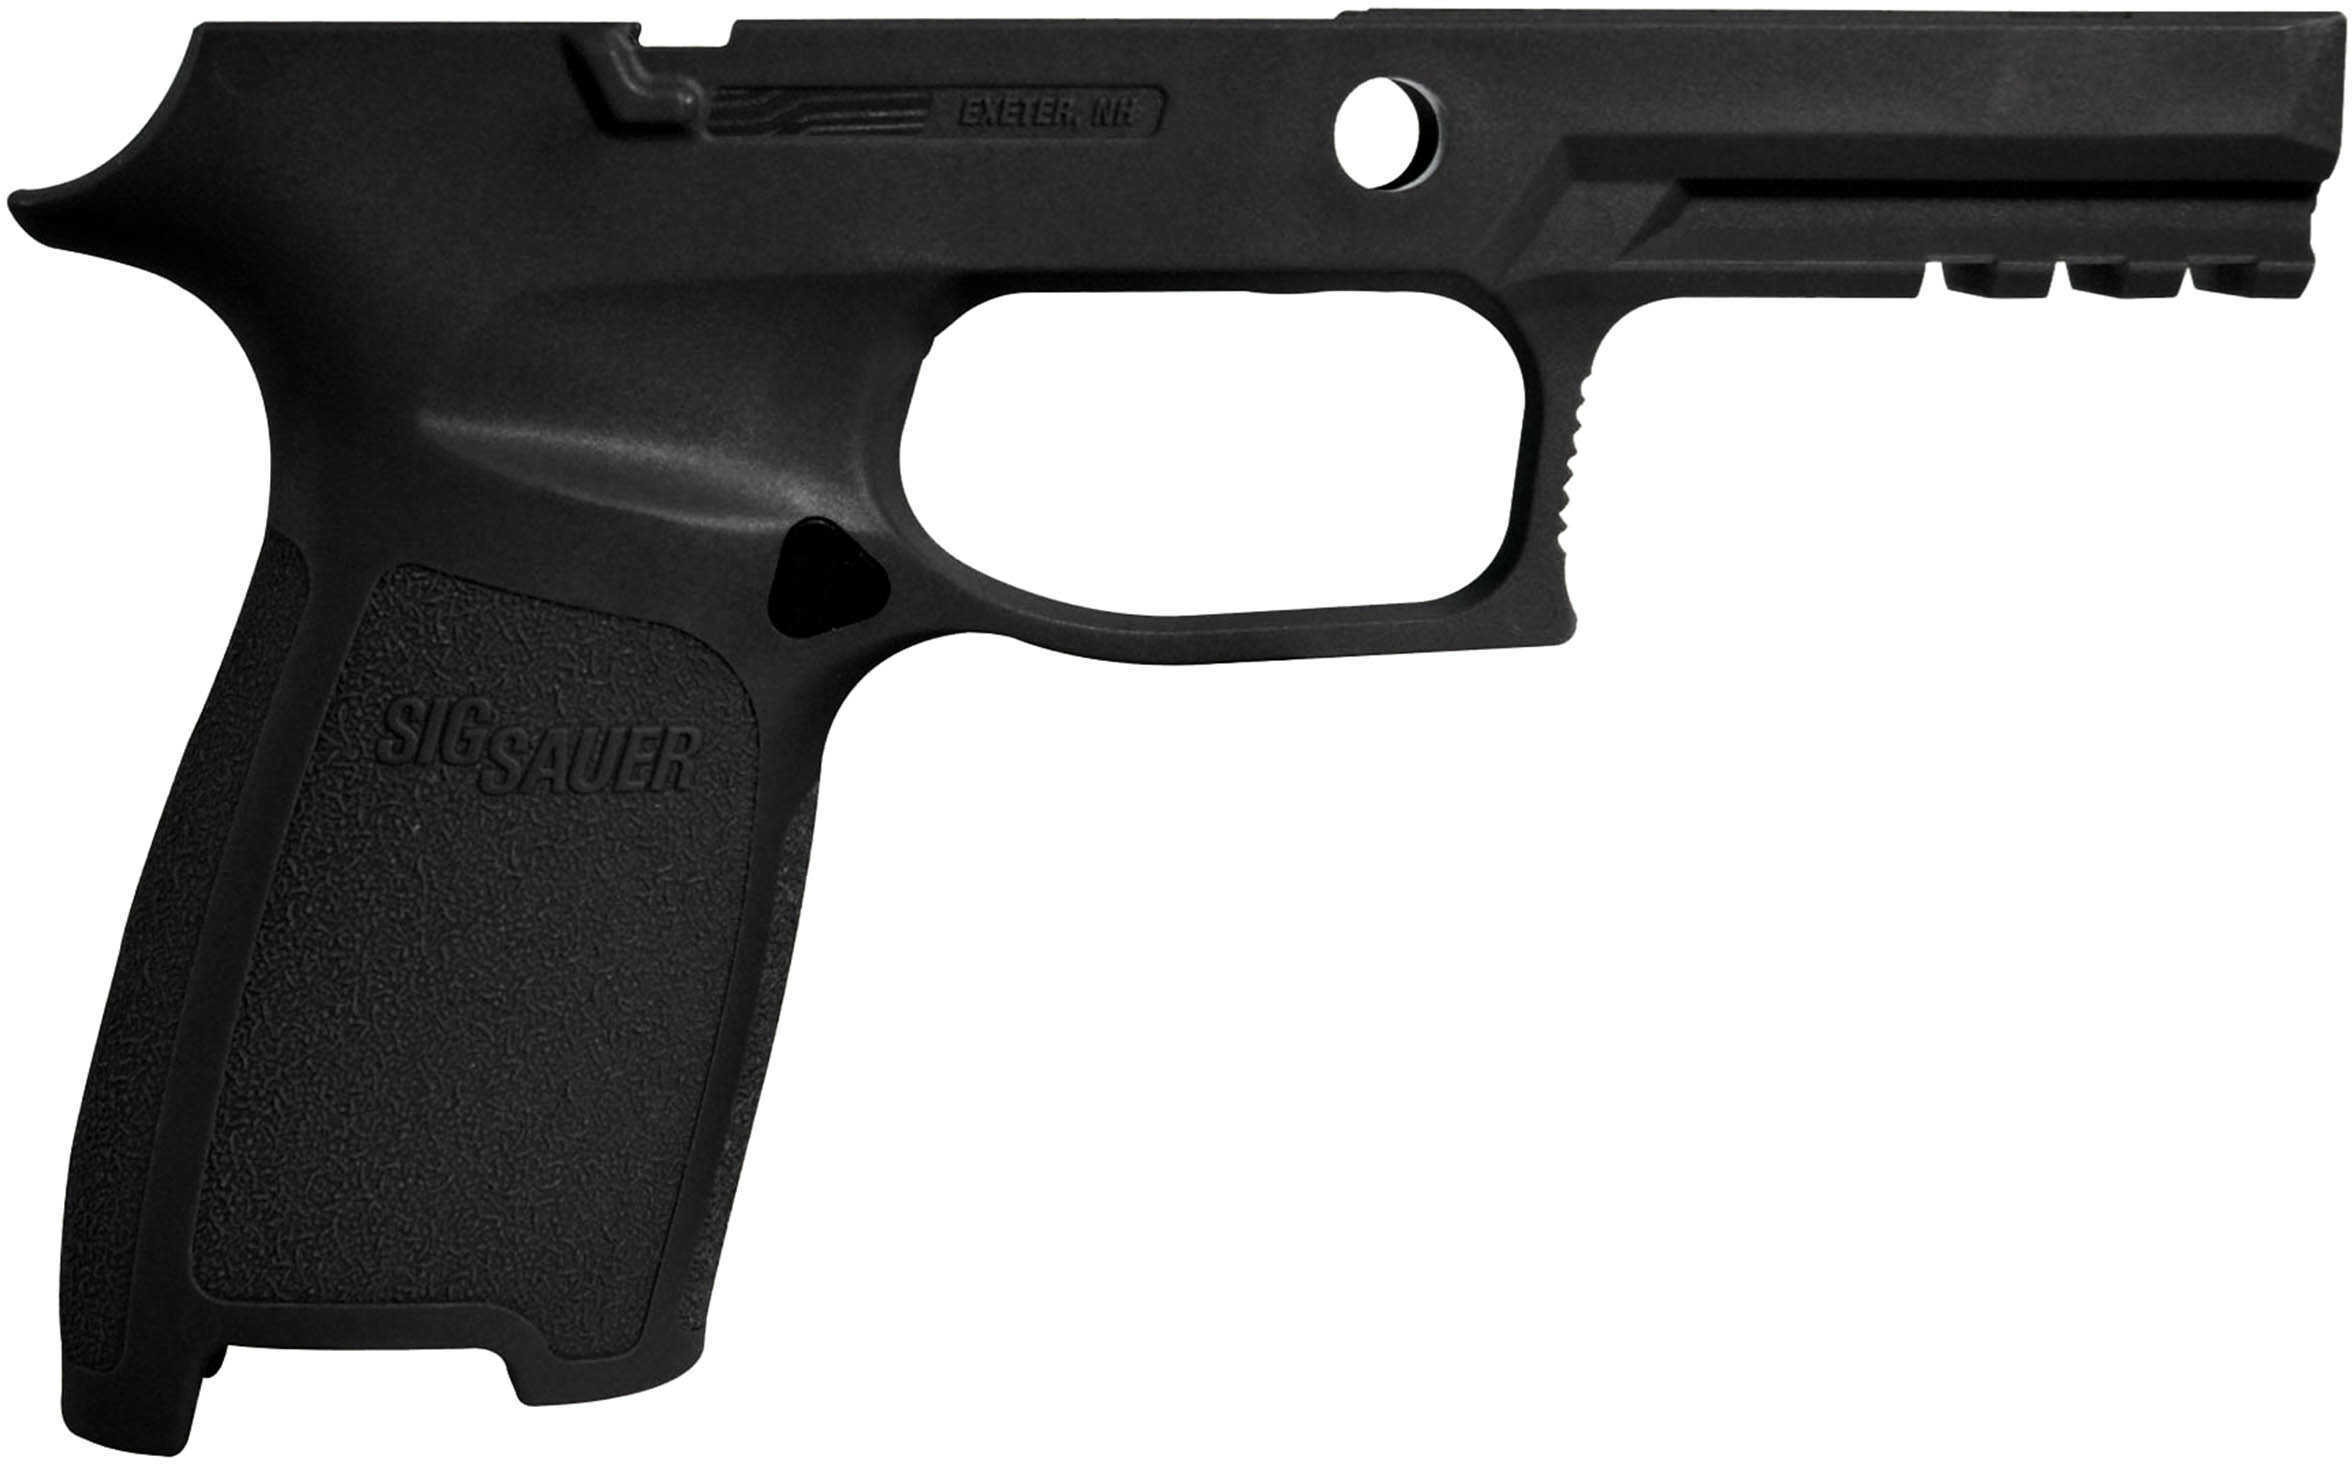 Grip Module Assembly P250/P320 (9mm/.40 S&W/.357-img-1